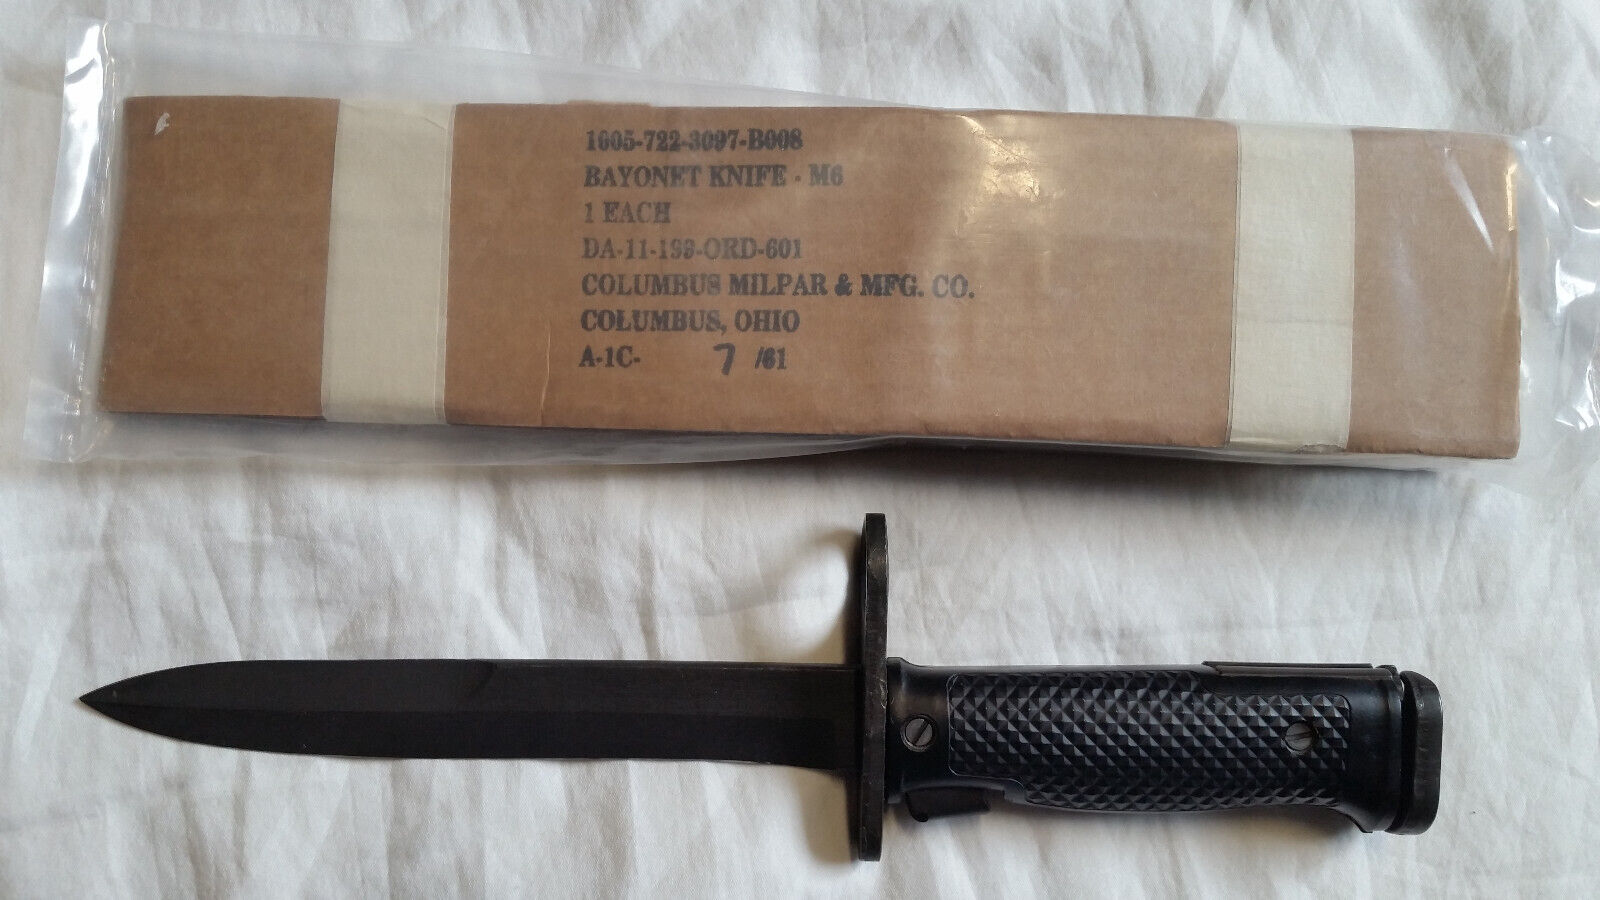 New in package / old stock US Military Columbus Milpar Co Bayonet IM6I Knife